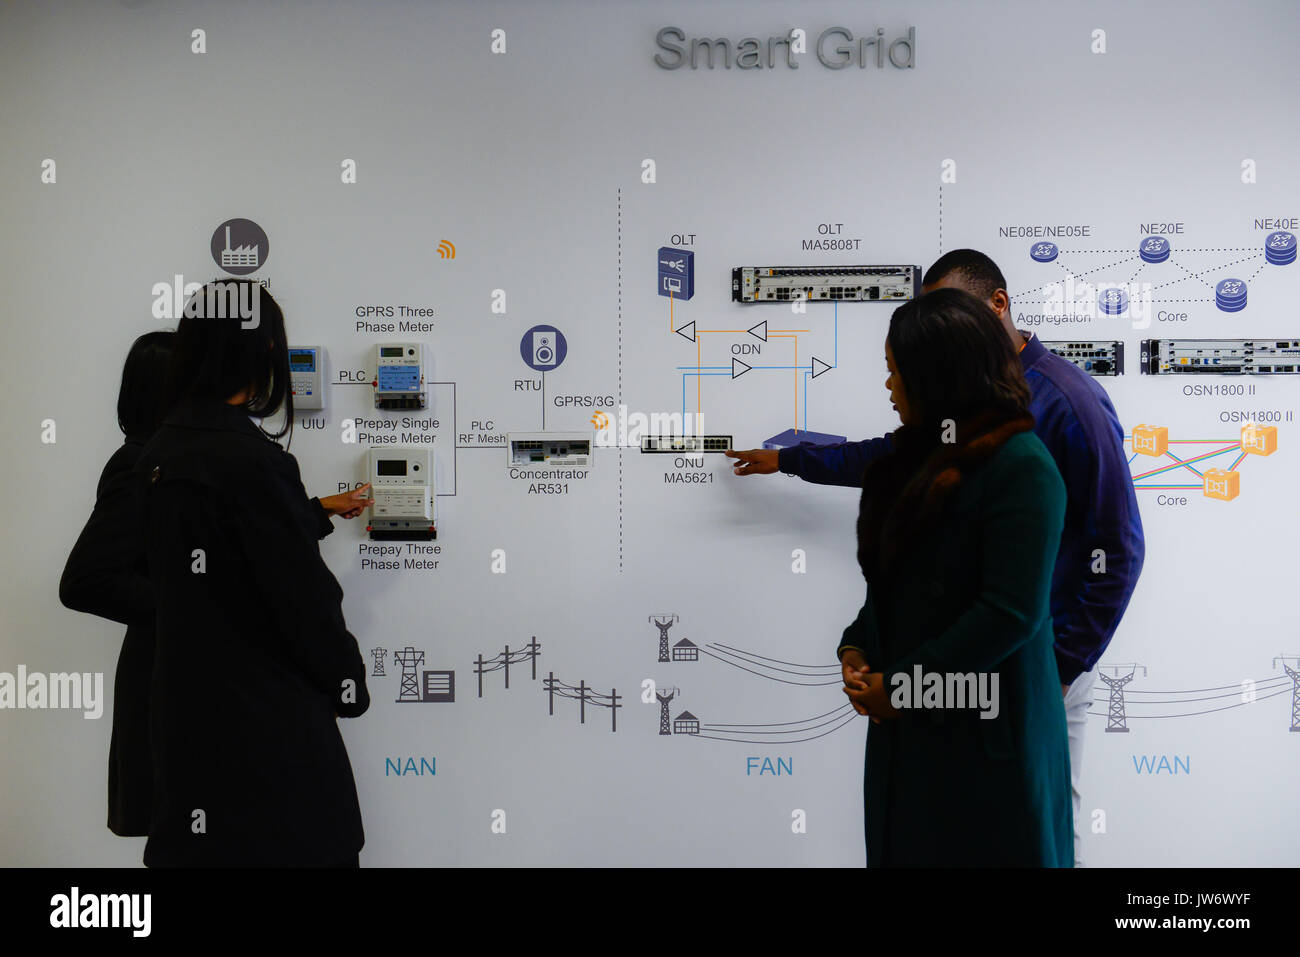 (170811) -- JOHANNESBURG, Aug. 11, 2017 (Xinhua) -- People visit the displayed Smart Grid solution at Huawei's Information and Communications Technology (ICT) Innovation and Experience Center in Johannesburg, South Africa, on July 17, 2017. Chinese leading global ICT solution provider Huawei launched its first African Innovation and Experience Center in Johannesburg, South Africa on July 19, 2016, to showcase the company's state-of-the-art ICT products and solutions in the field. Covering an area of 500 square meters and with an investment of more than 72 million Rands (about 4.8 million US Do Stock Photo